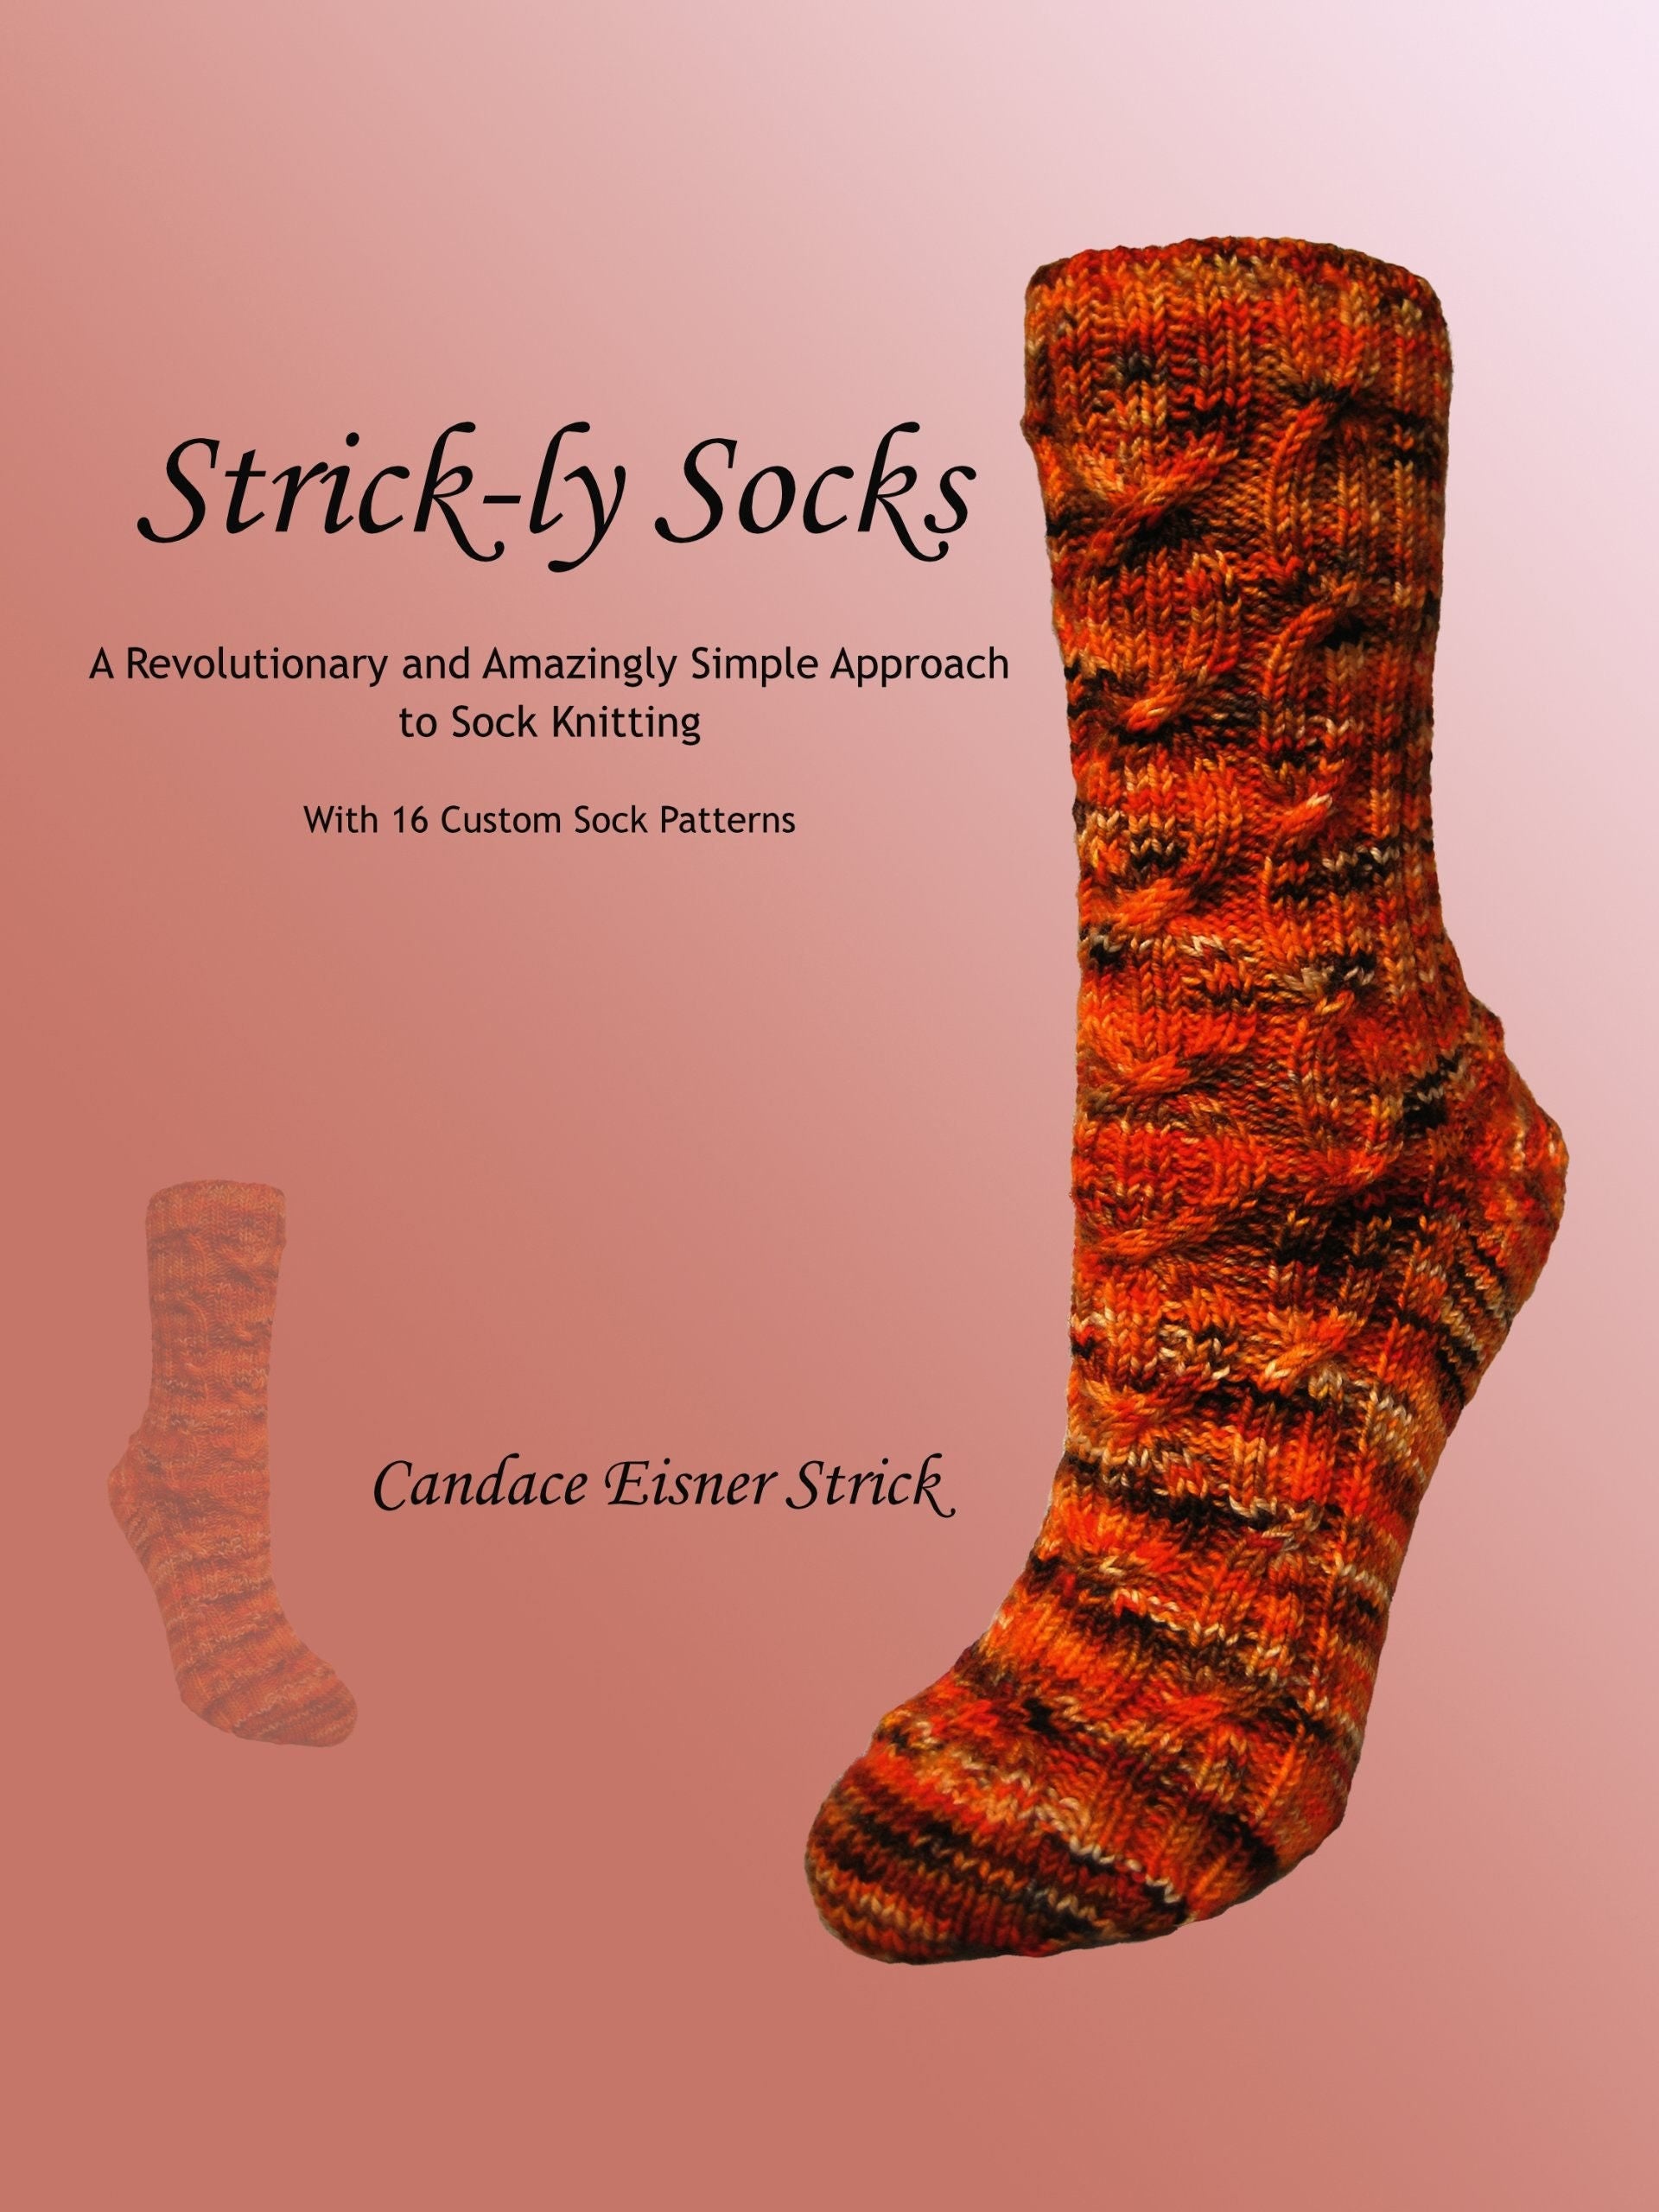 Strick-ly Socks Sock Knitting Techniques and Pattern Book by Candace Eisner Strick for Strickwear